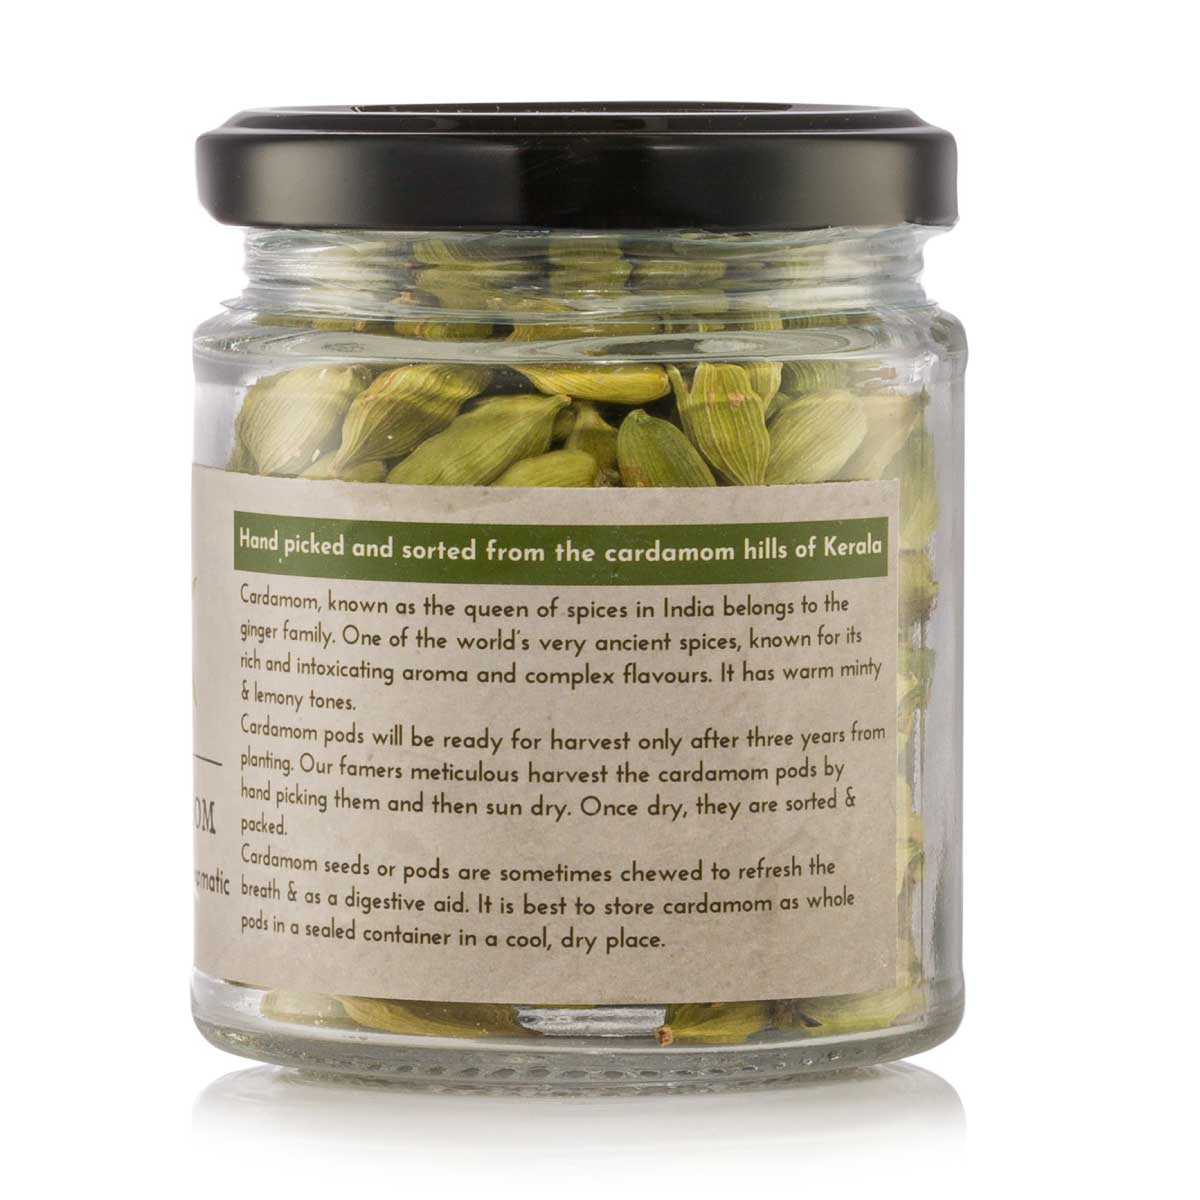 Product: Honey and Spice Cardamom